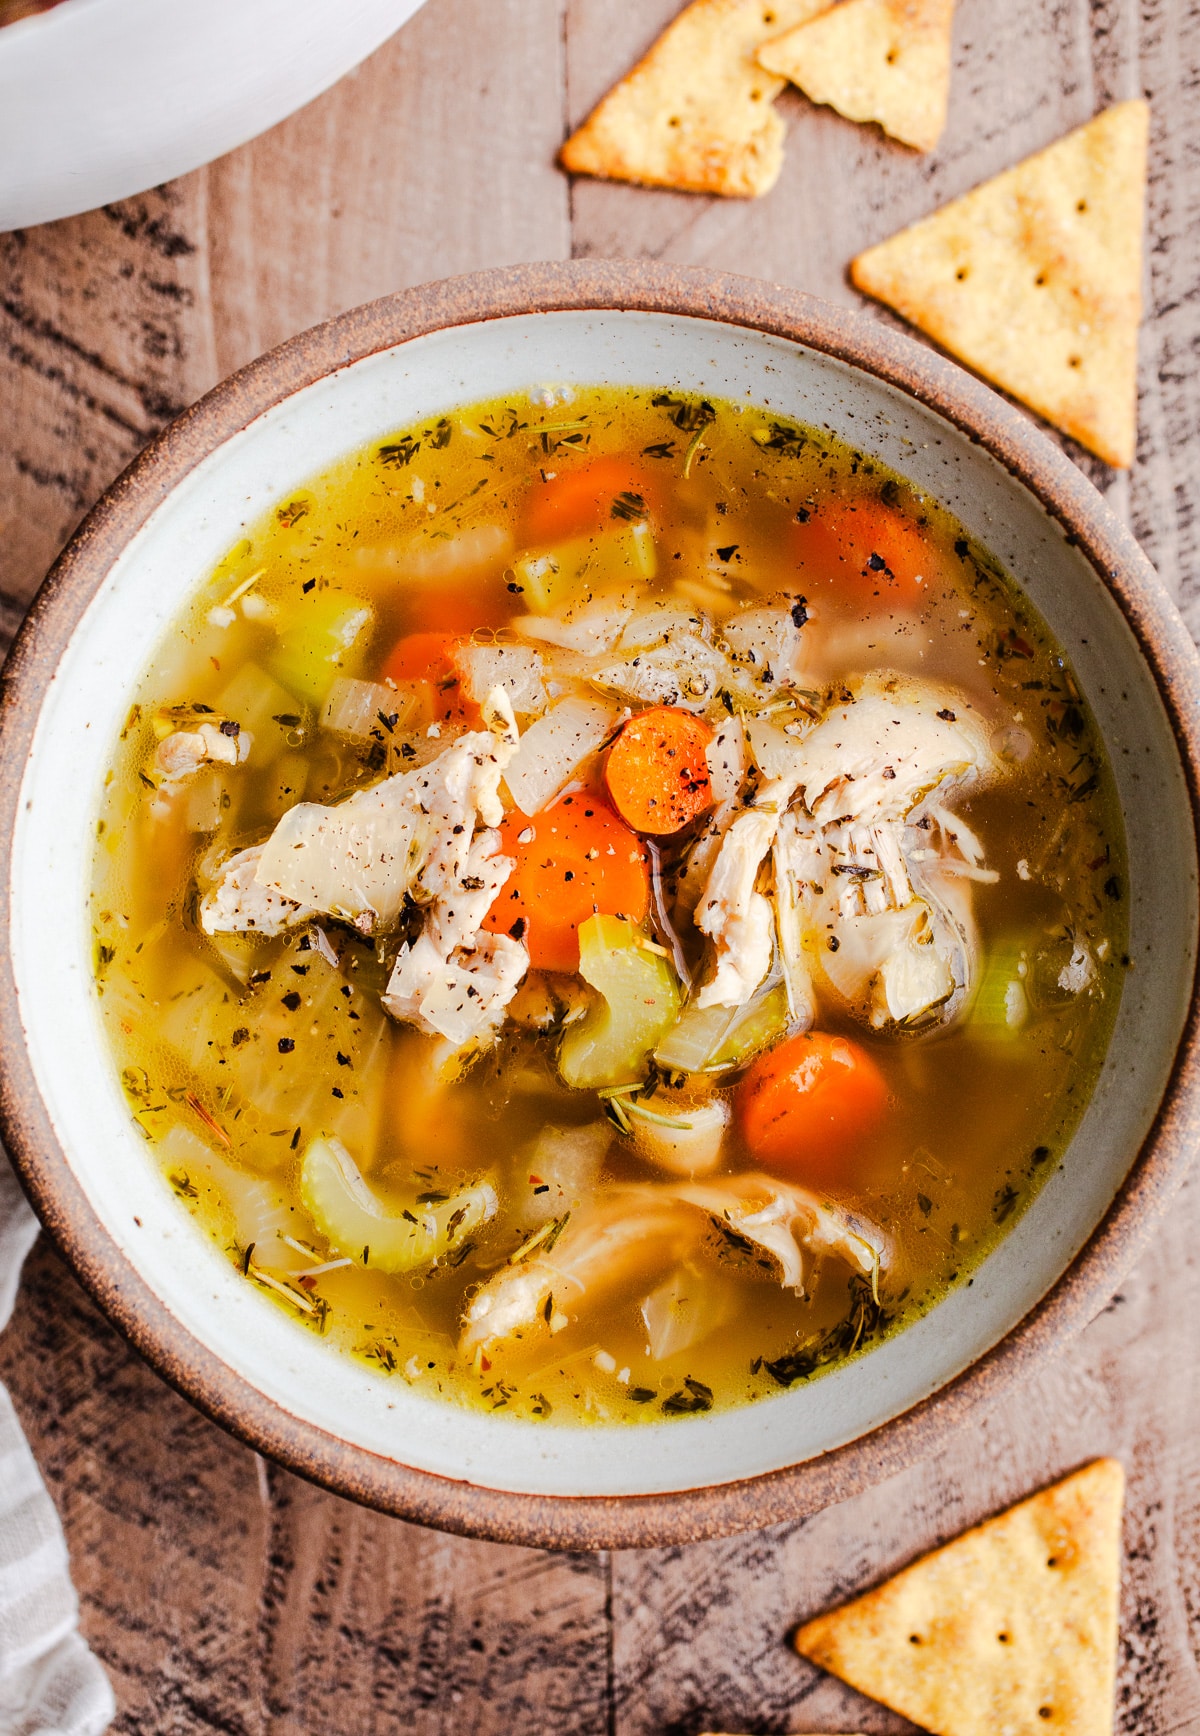 A bowl of chicken soup.